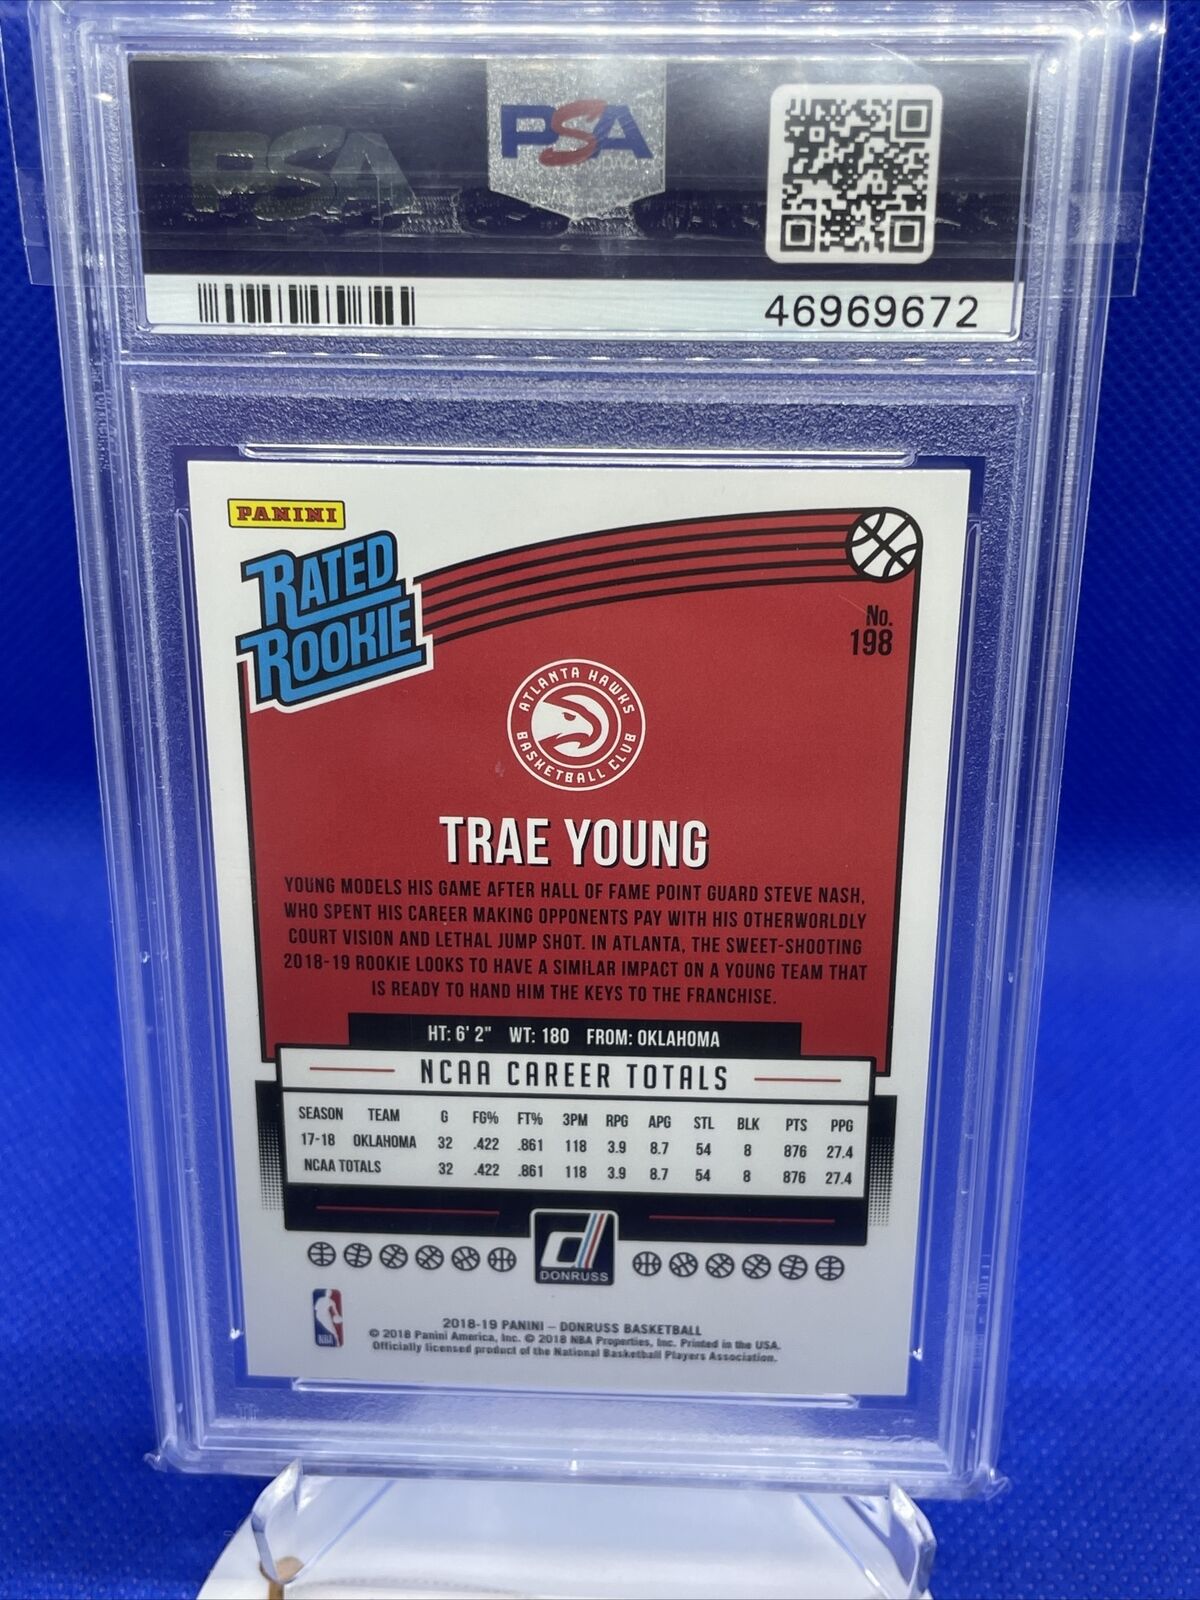 Trae Young 2018-19 Panini Donruss Optic Rated Rookie Shock Autograph RC Card  #198 PSA/DNA (White)